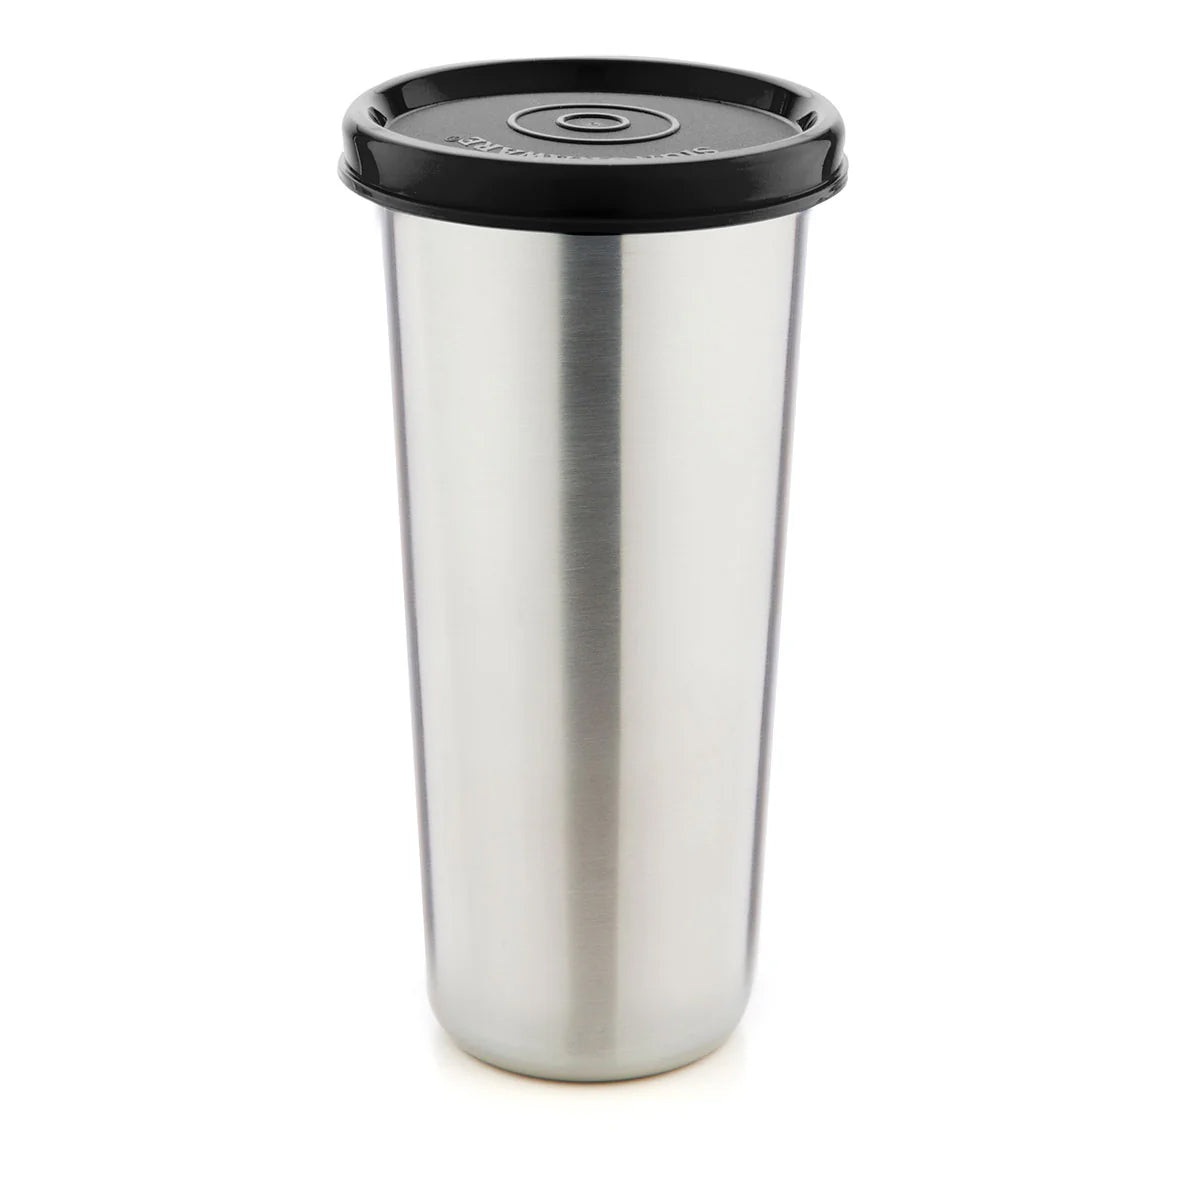 Signoraware Stainless Steel Tumbler with Lid